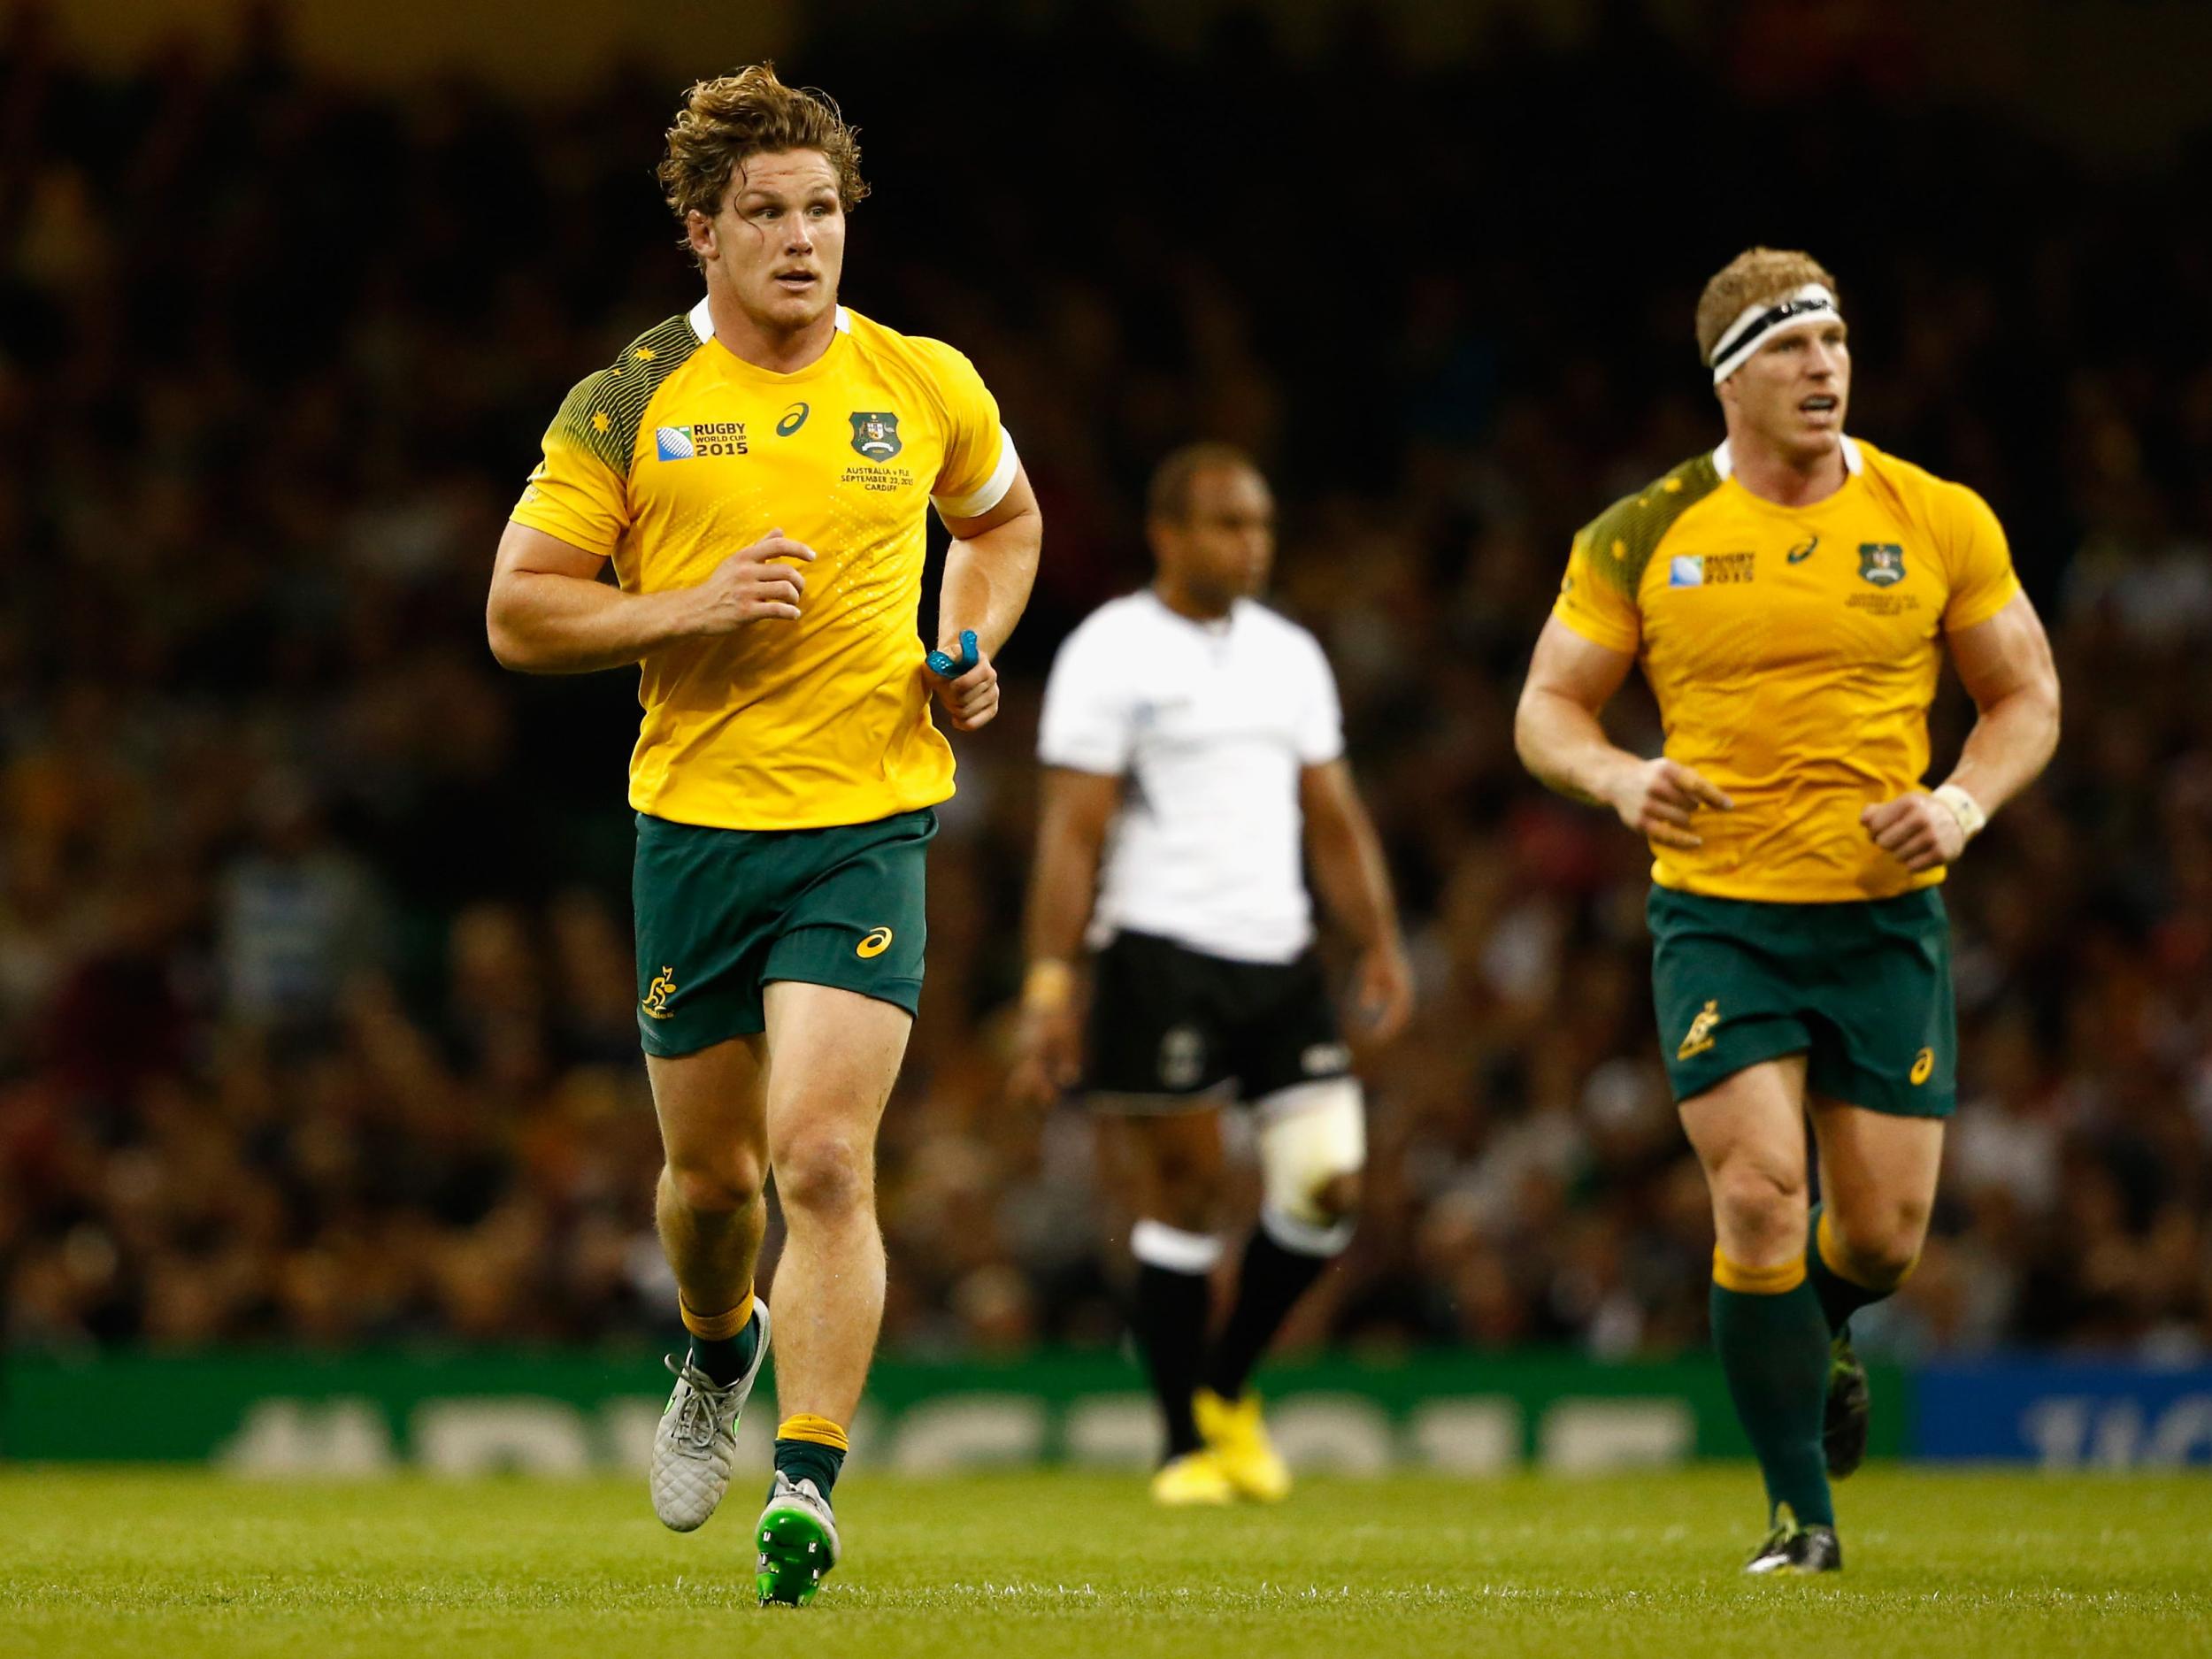 Michael Hooper and David Pocock’s back row combination will be crucial for Australia, as it was four years ago